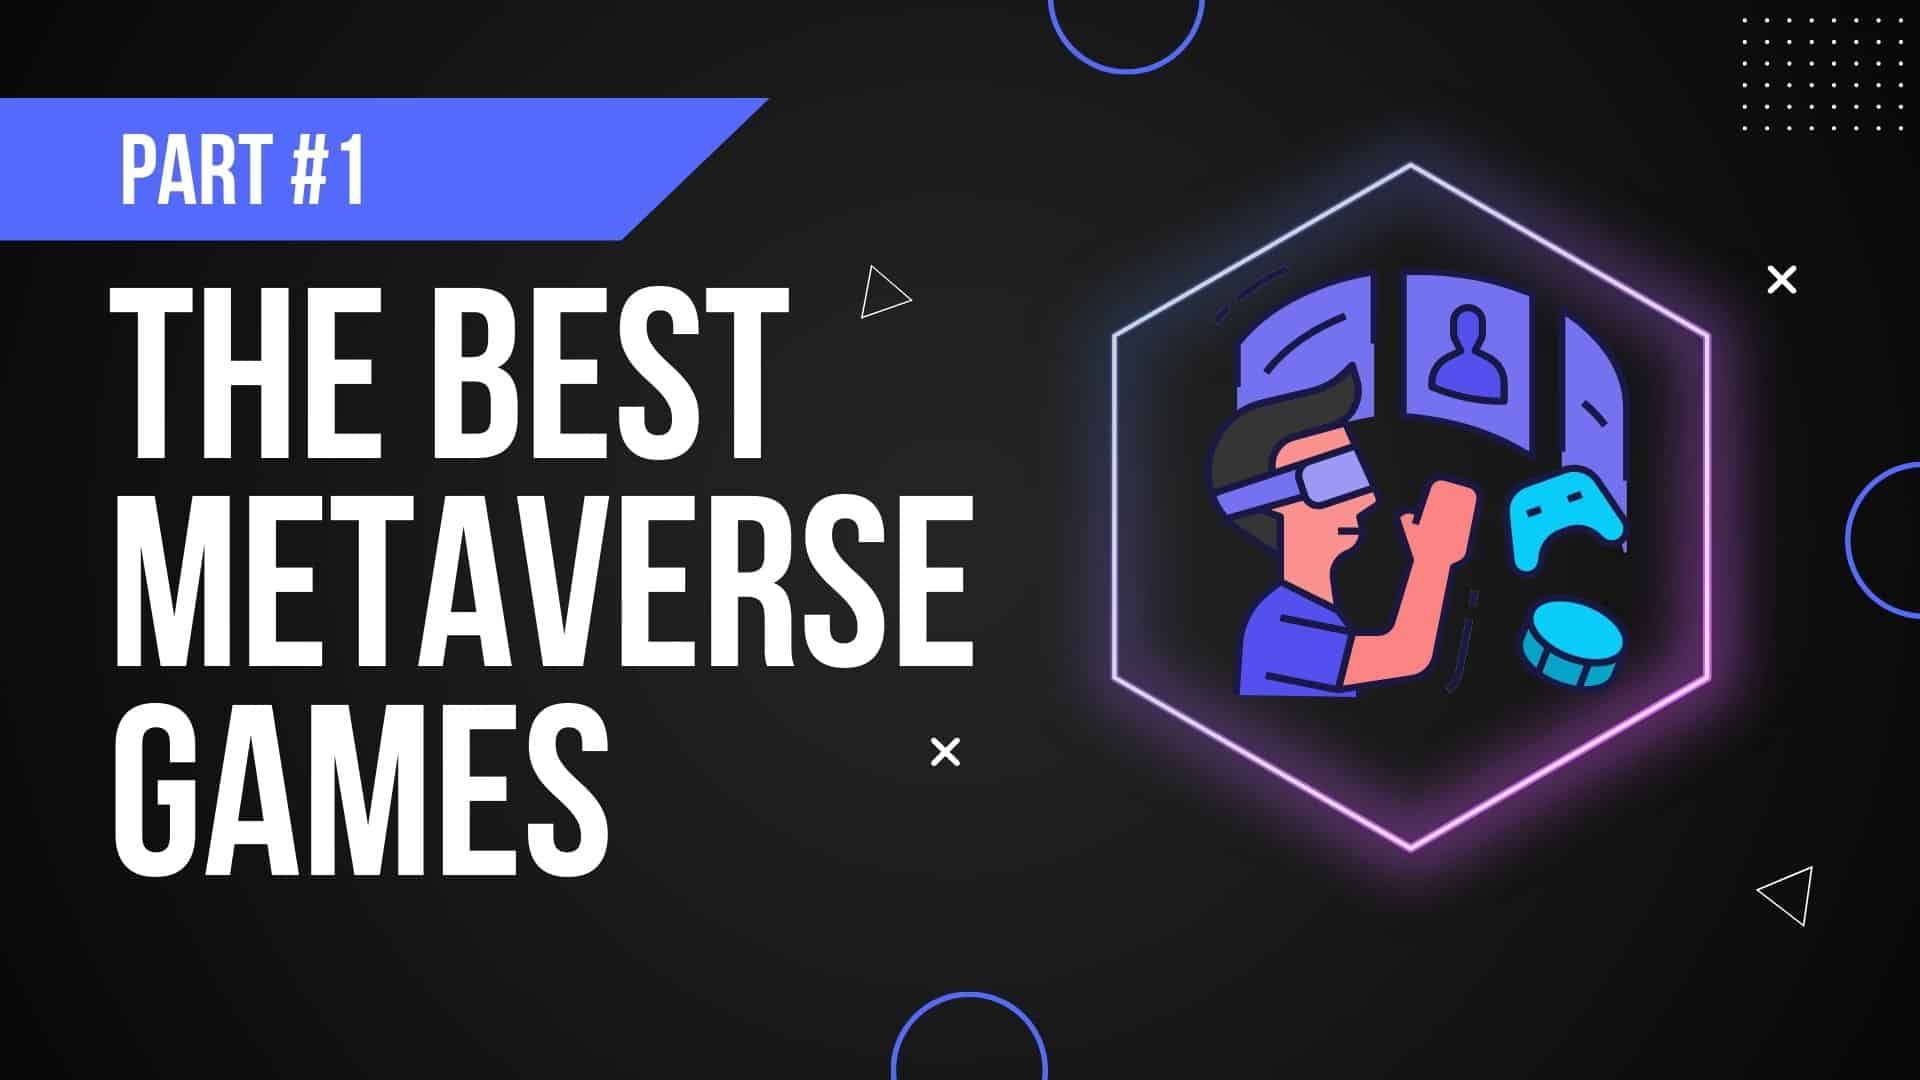 The Best Metaverse Games to Play in 2022 - eGamers.io - P2E & NFT Games Portal